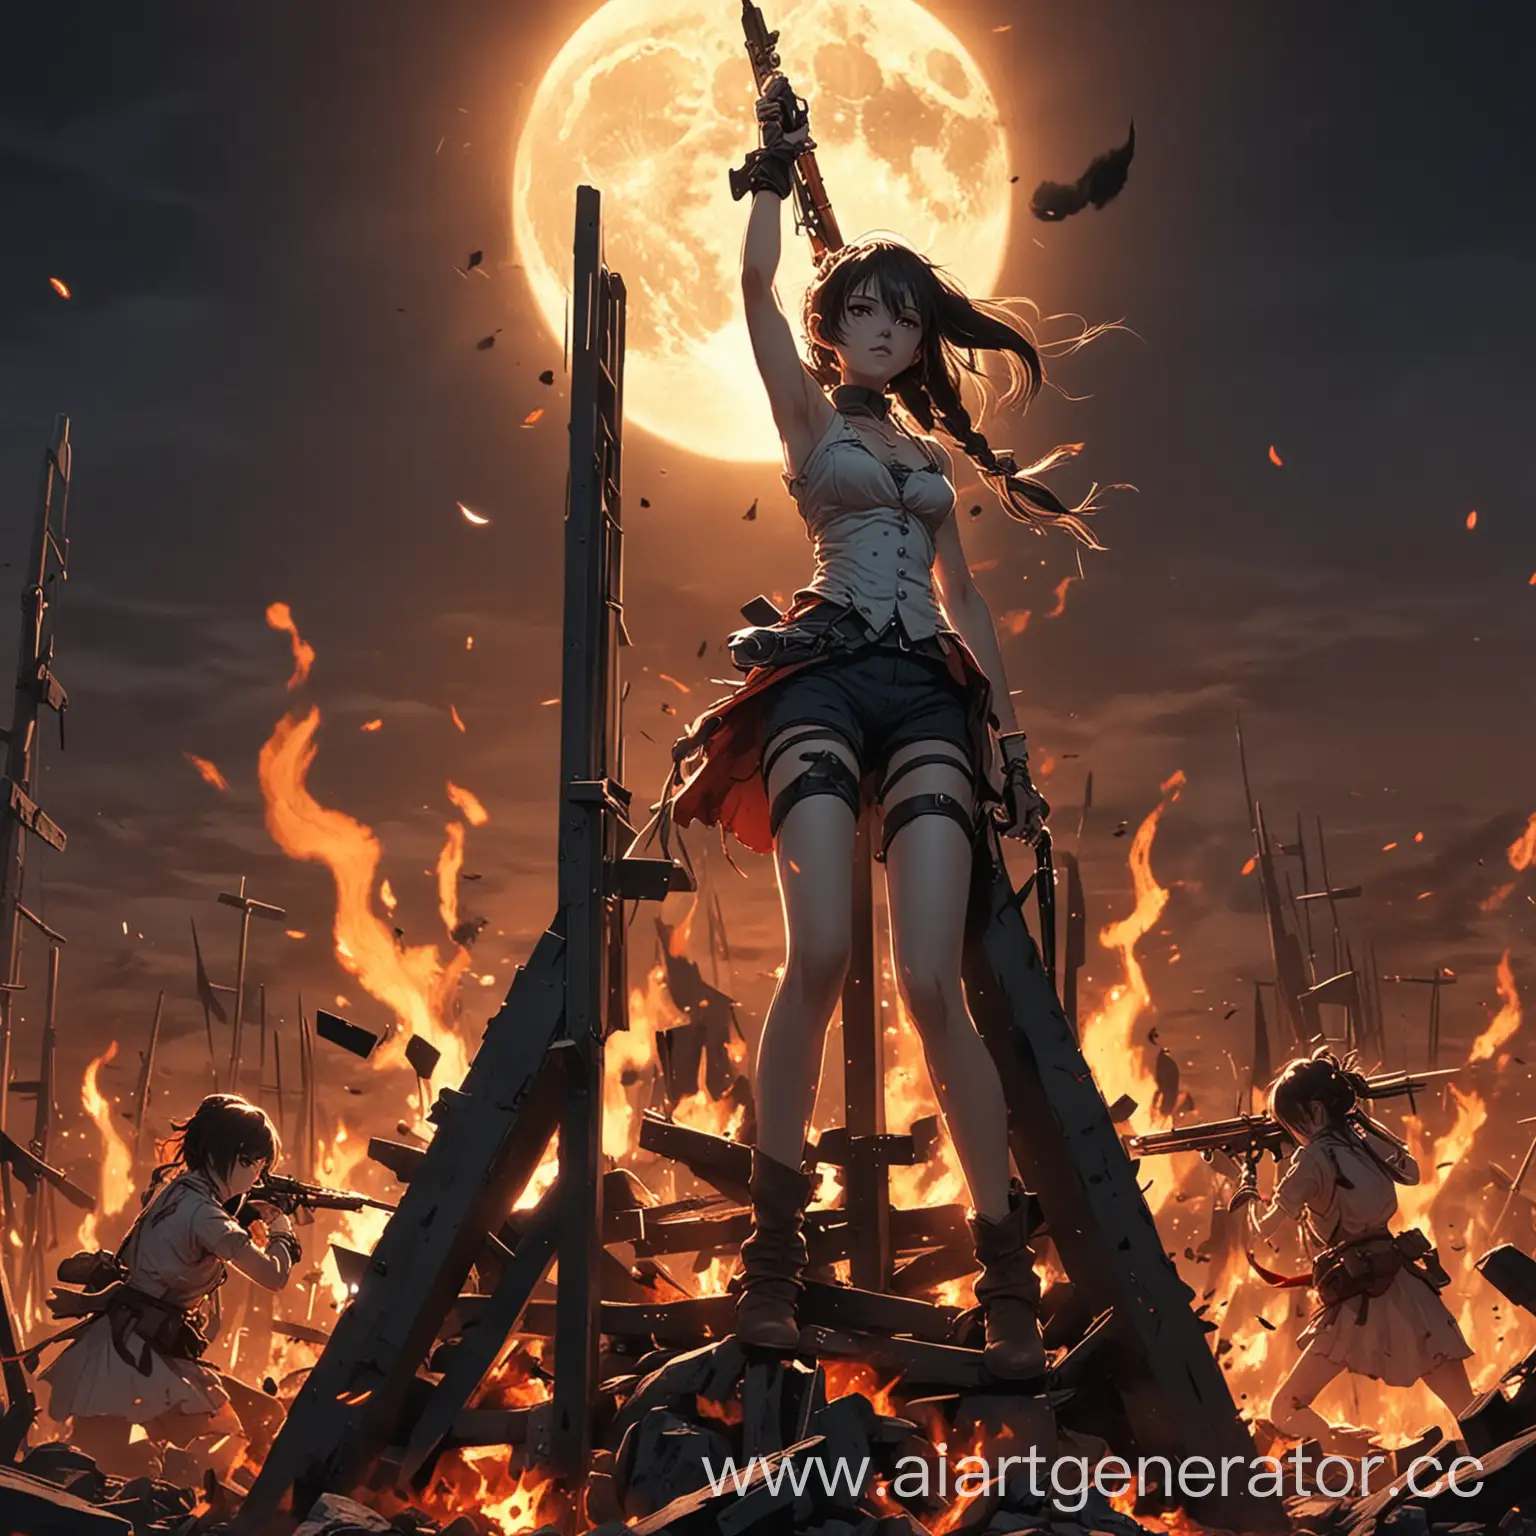 Anime-Style-Girls-under-the-Fire-of-Guns